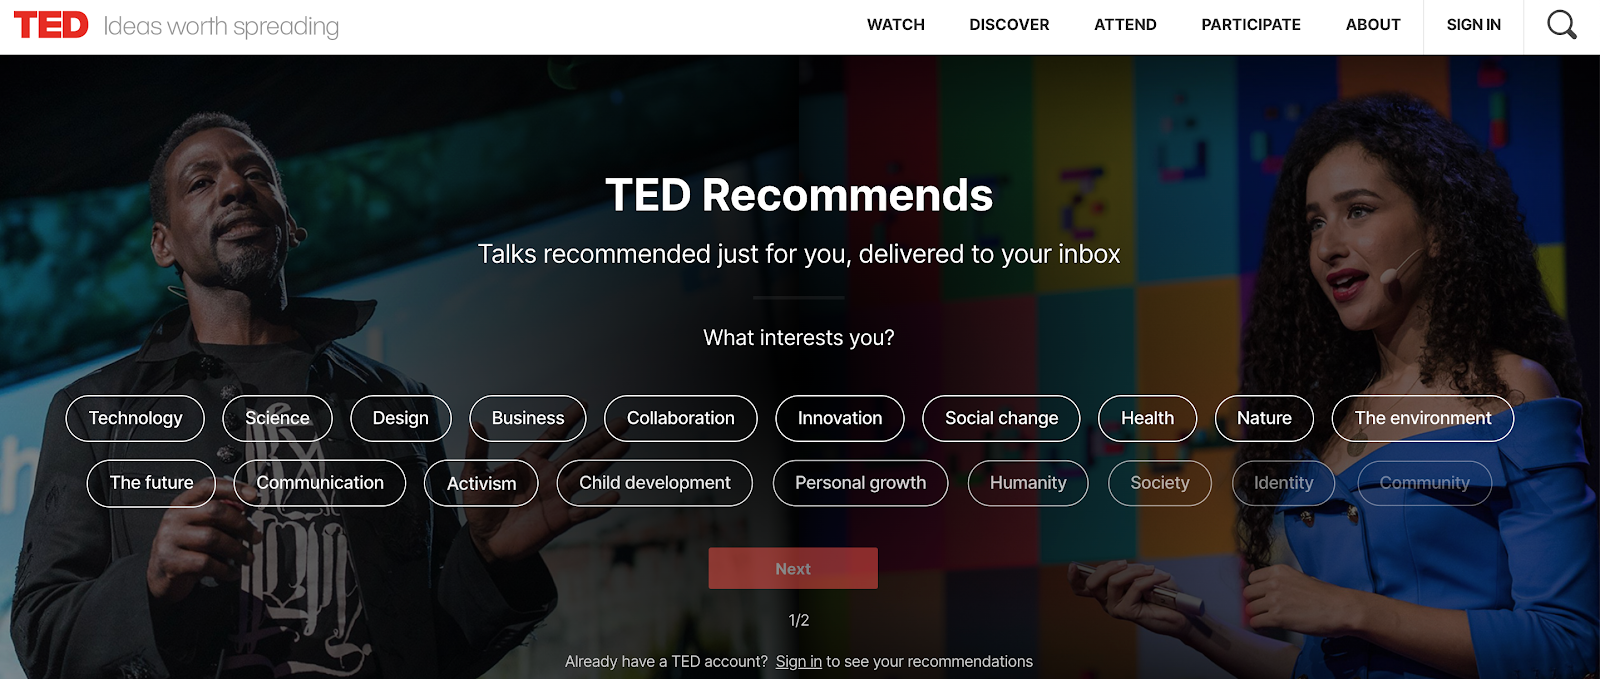 Ted, an alternative to watch inspirational video